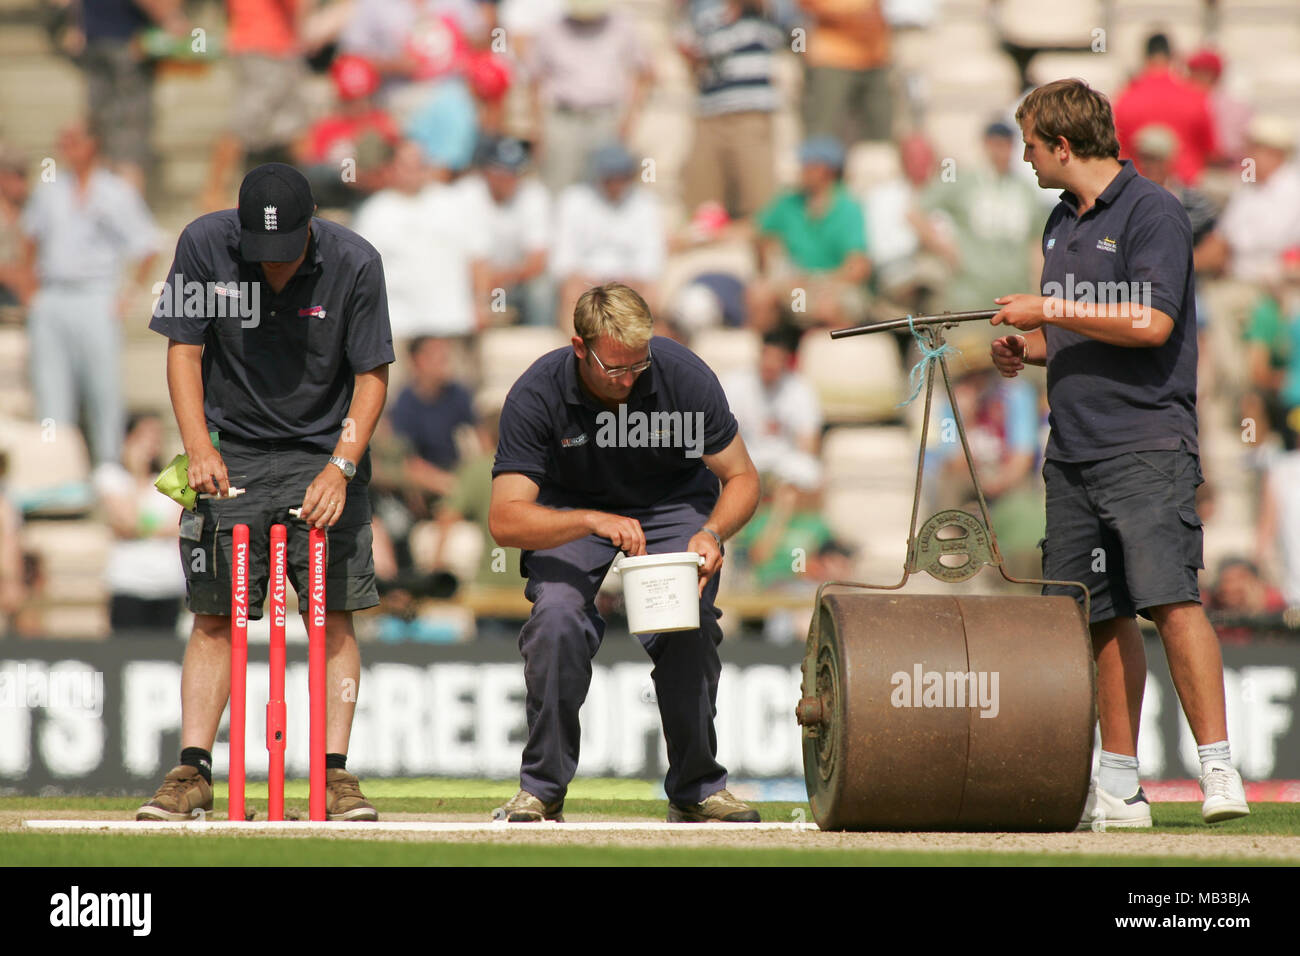 Groundsman at the Hampshire Rose bowl in Southampton prepare the wicket and mark out the stumps for a cricket match. Stock Photo